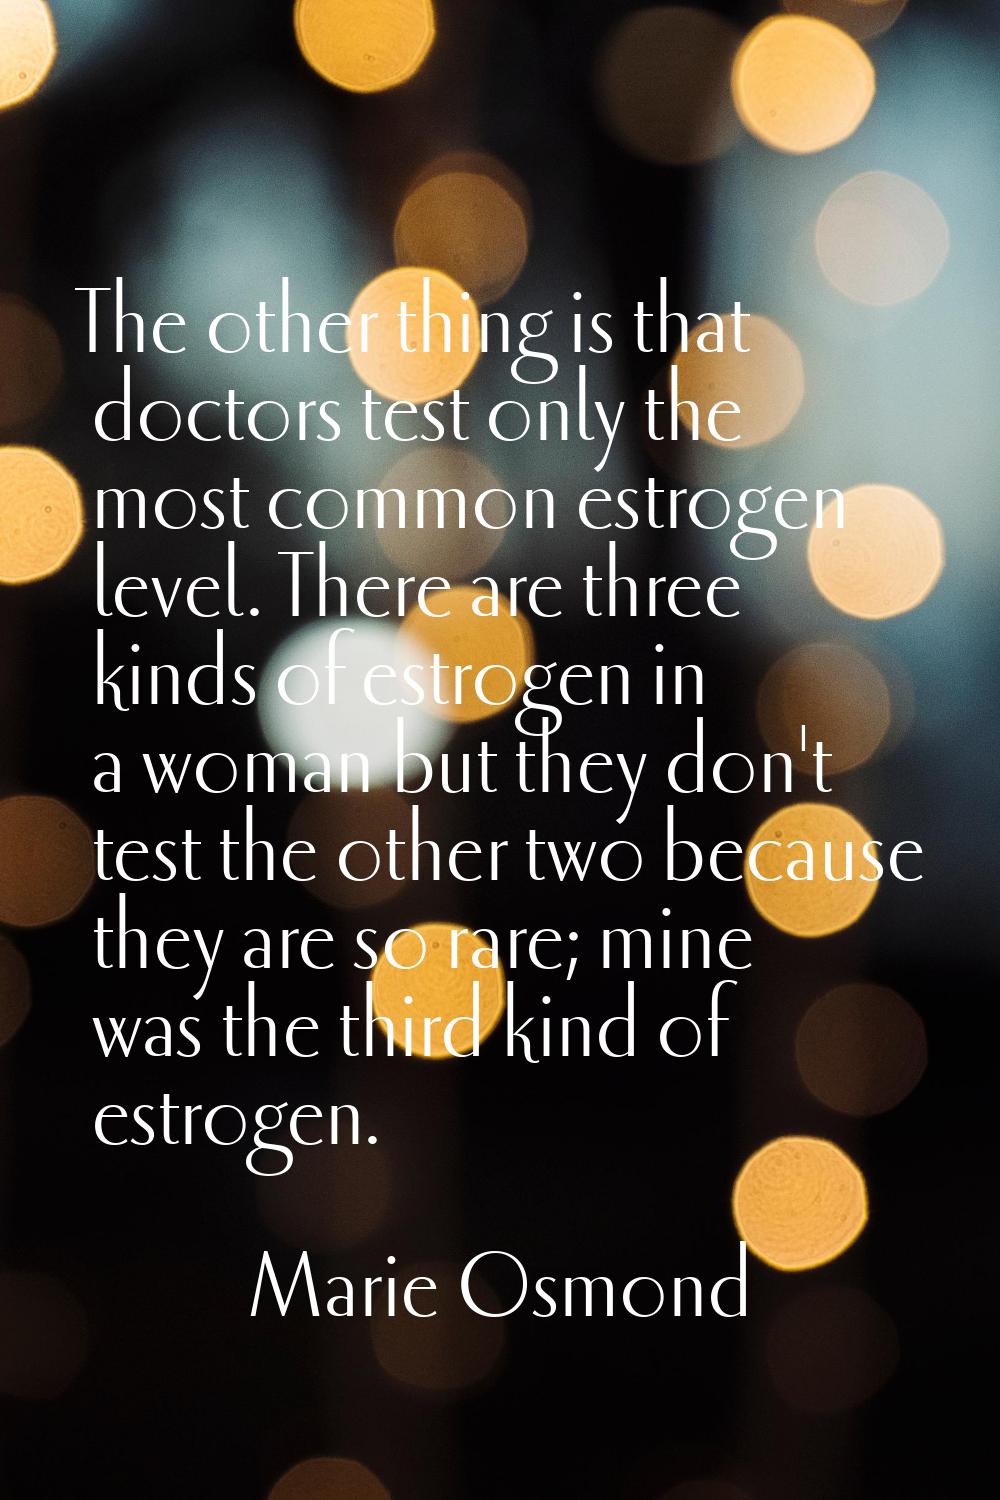 The other thing is that doctors test only the most common estrogen level. There are three kinds of 